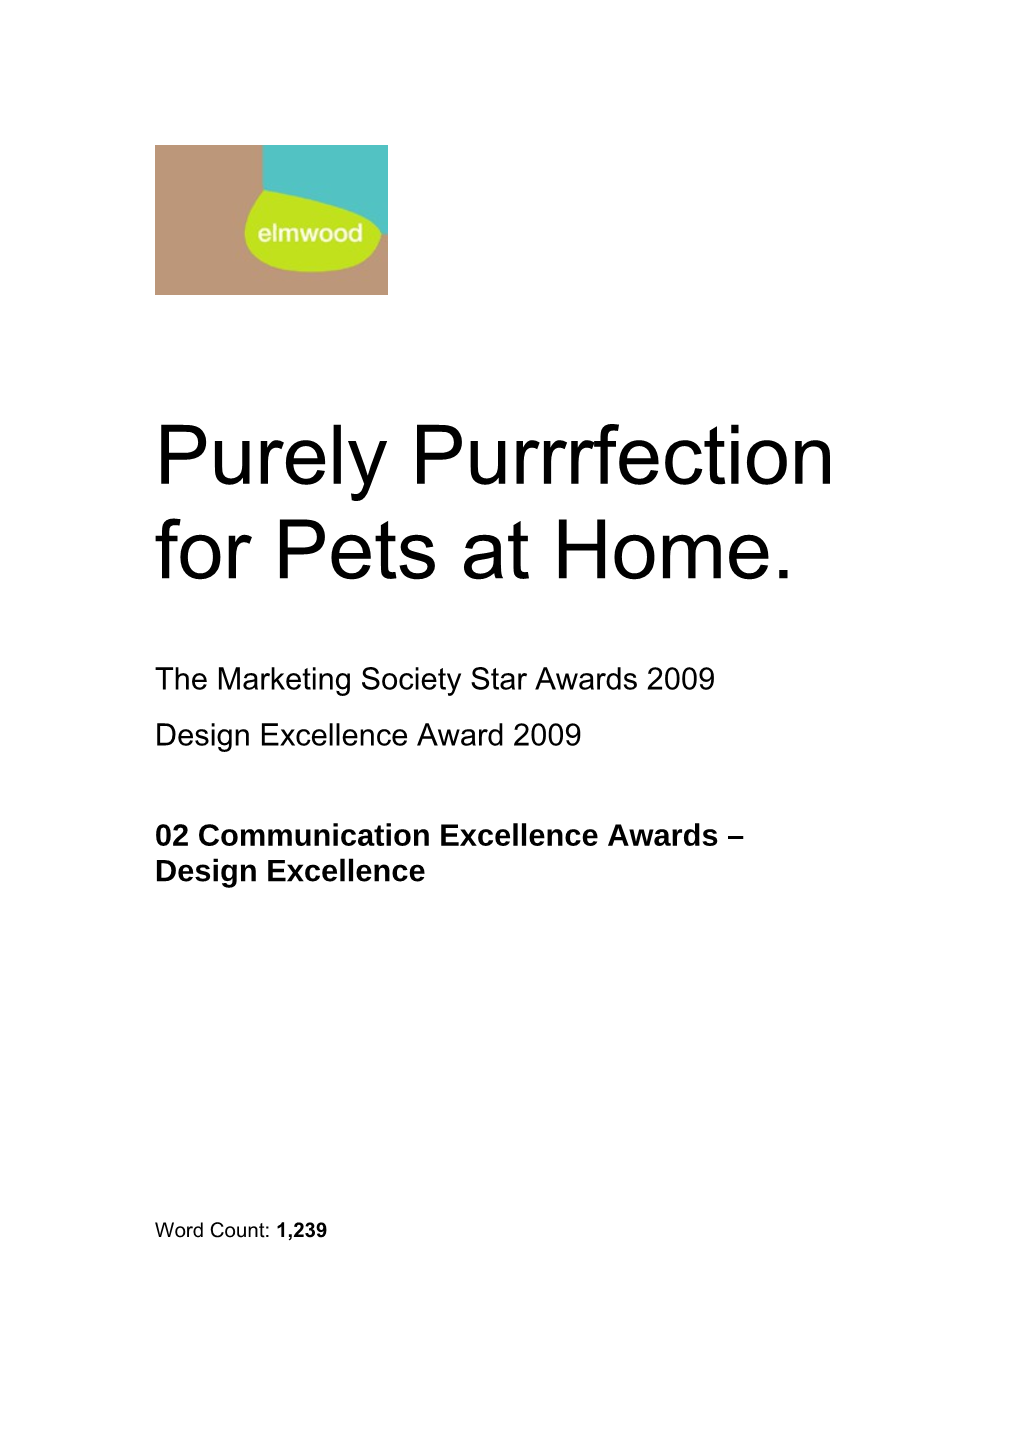 Purely Purrrfection for Pets at Home